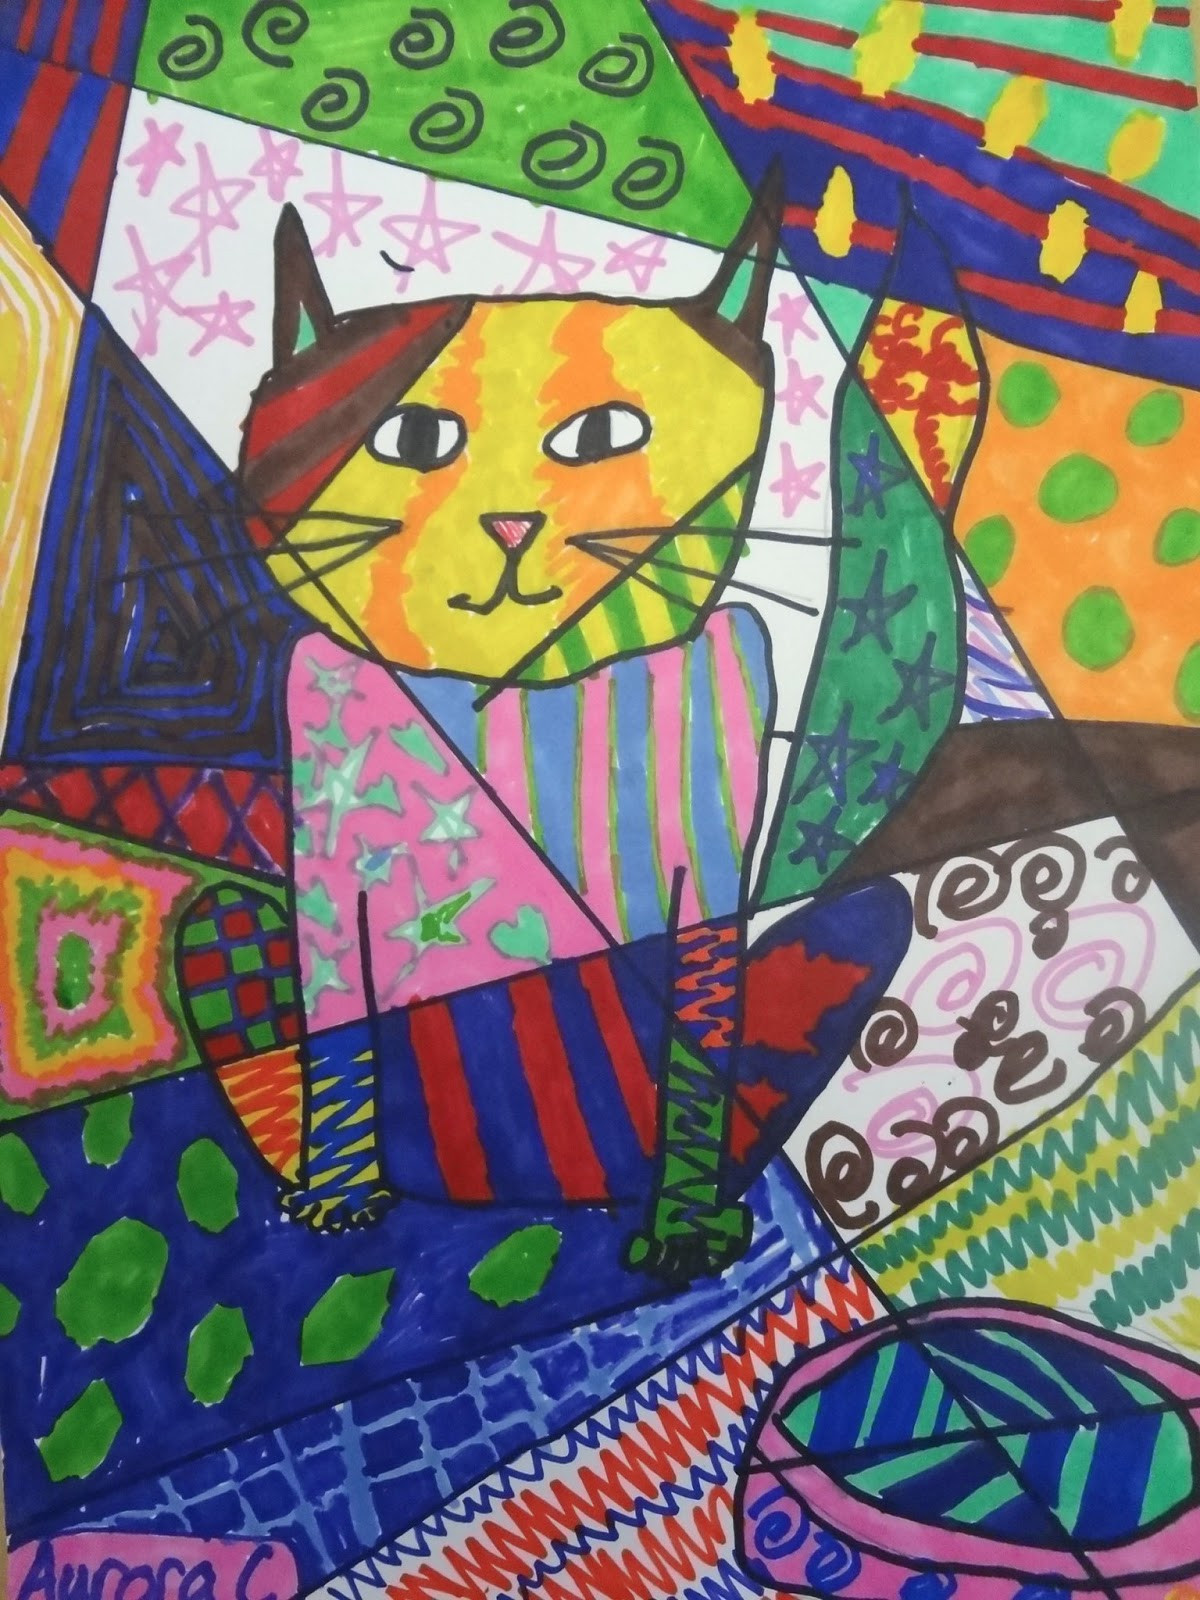 Art Project Ideas For Kids
 The Talking Walls Romero Britto Art Lesson for Kids